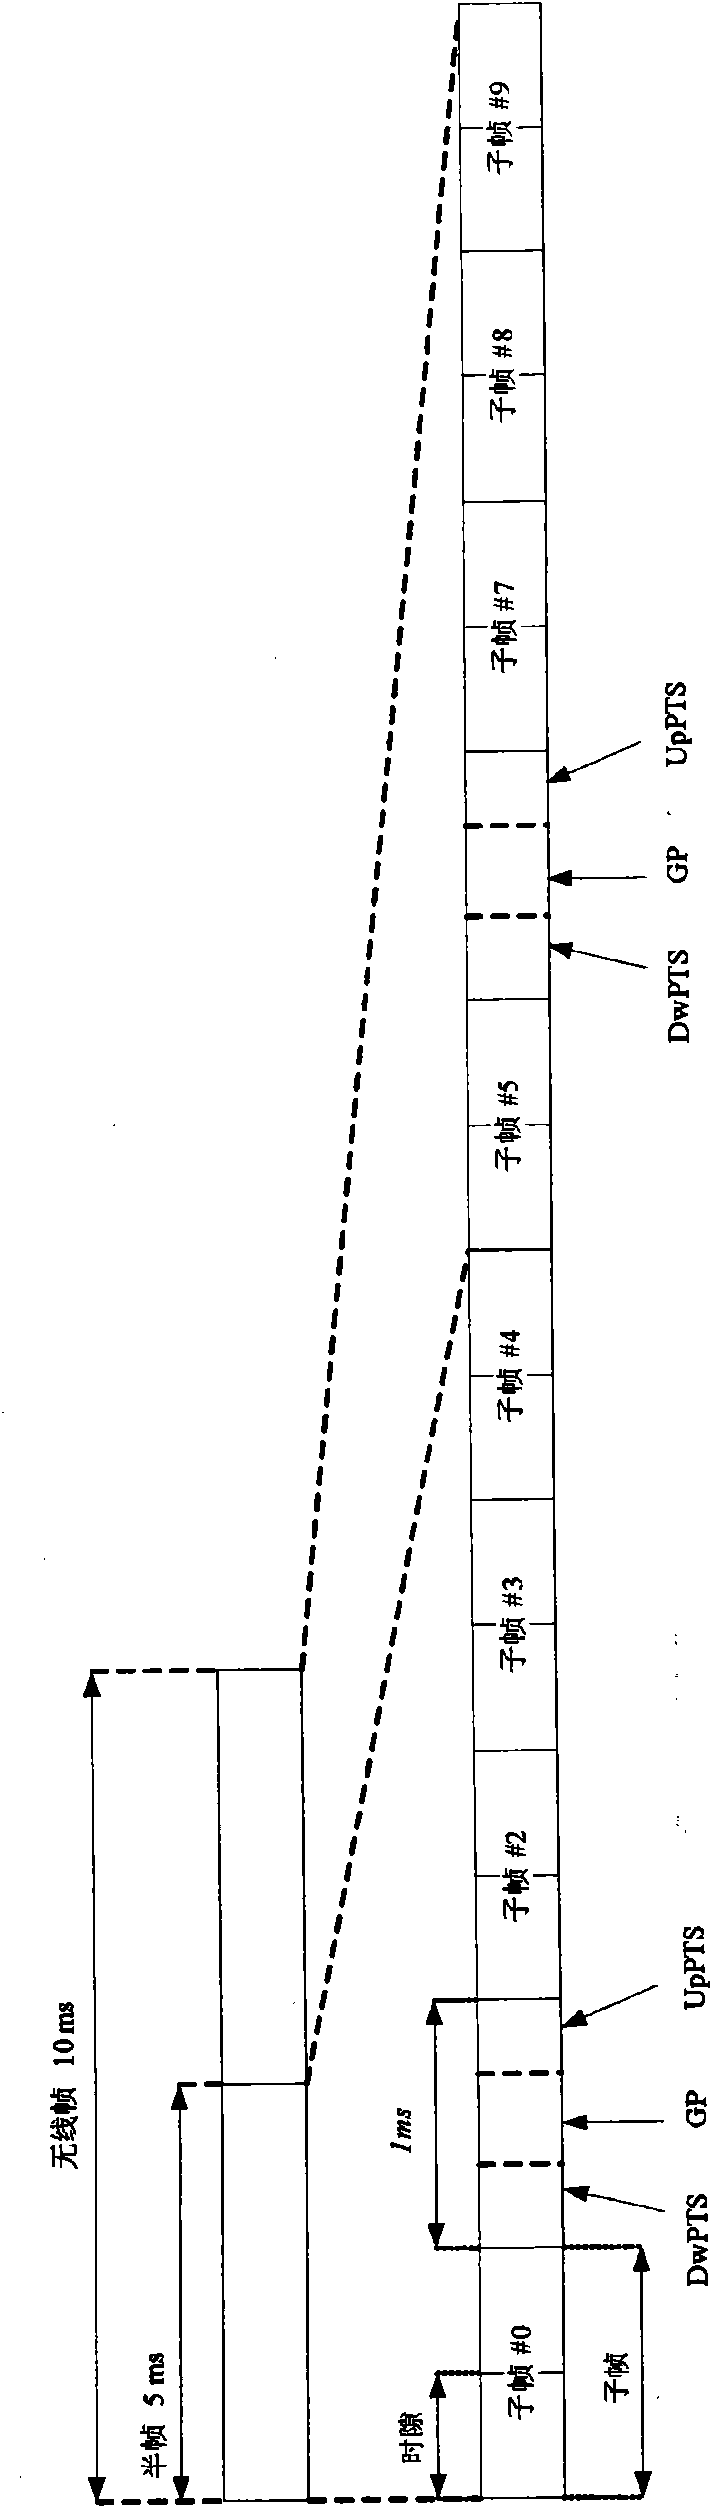 Method for notifying physical uplink control channel resource compression